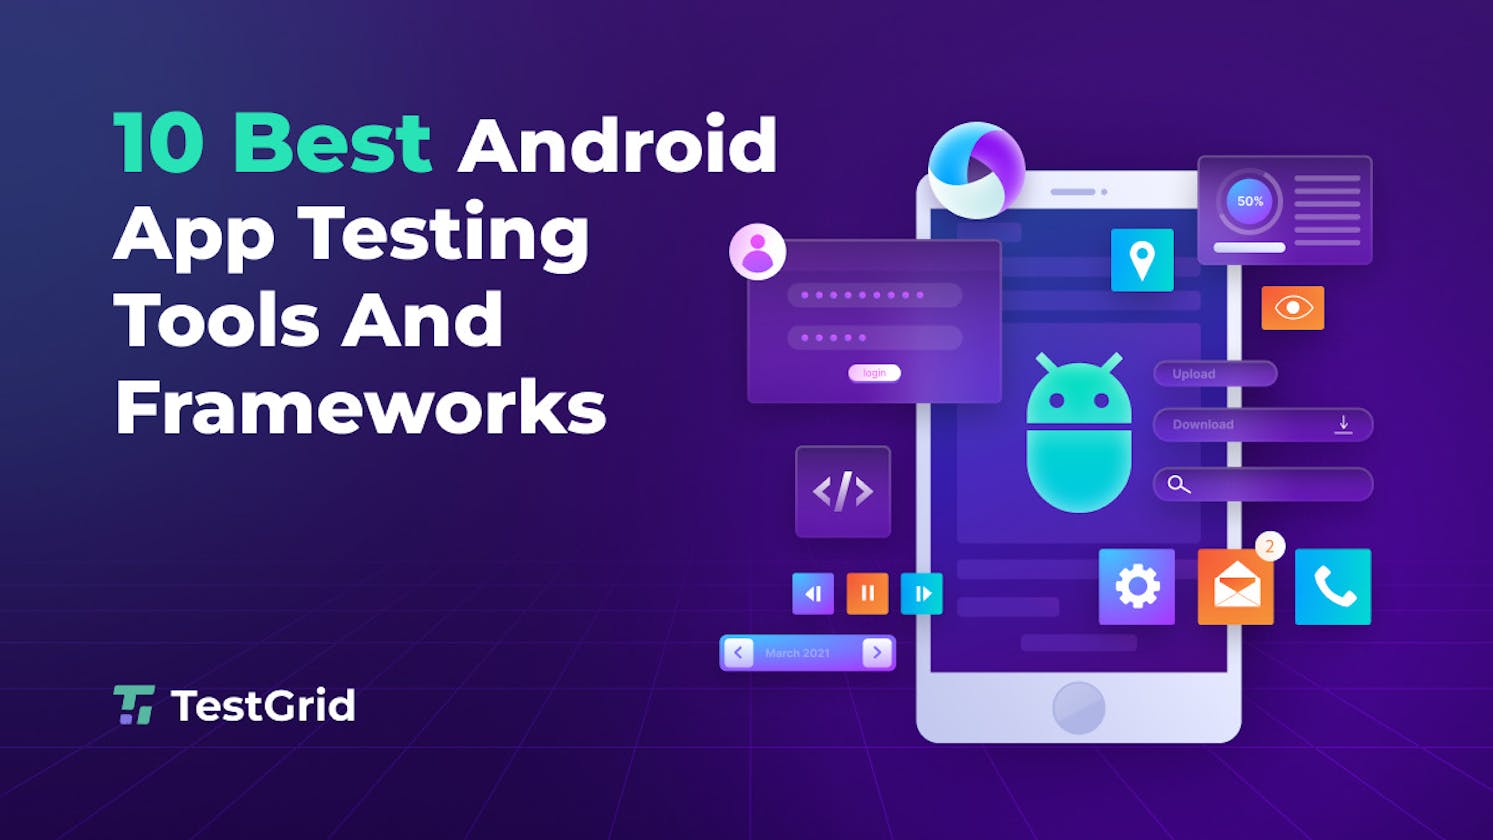 10 Best Android App Testing Tools and Frameworks